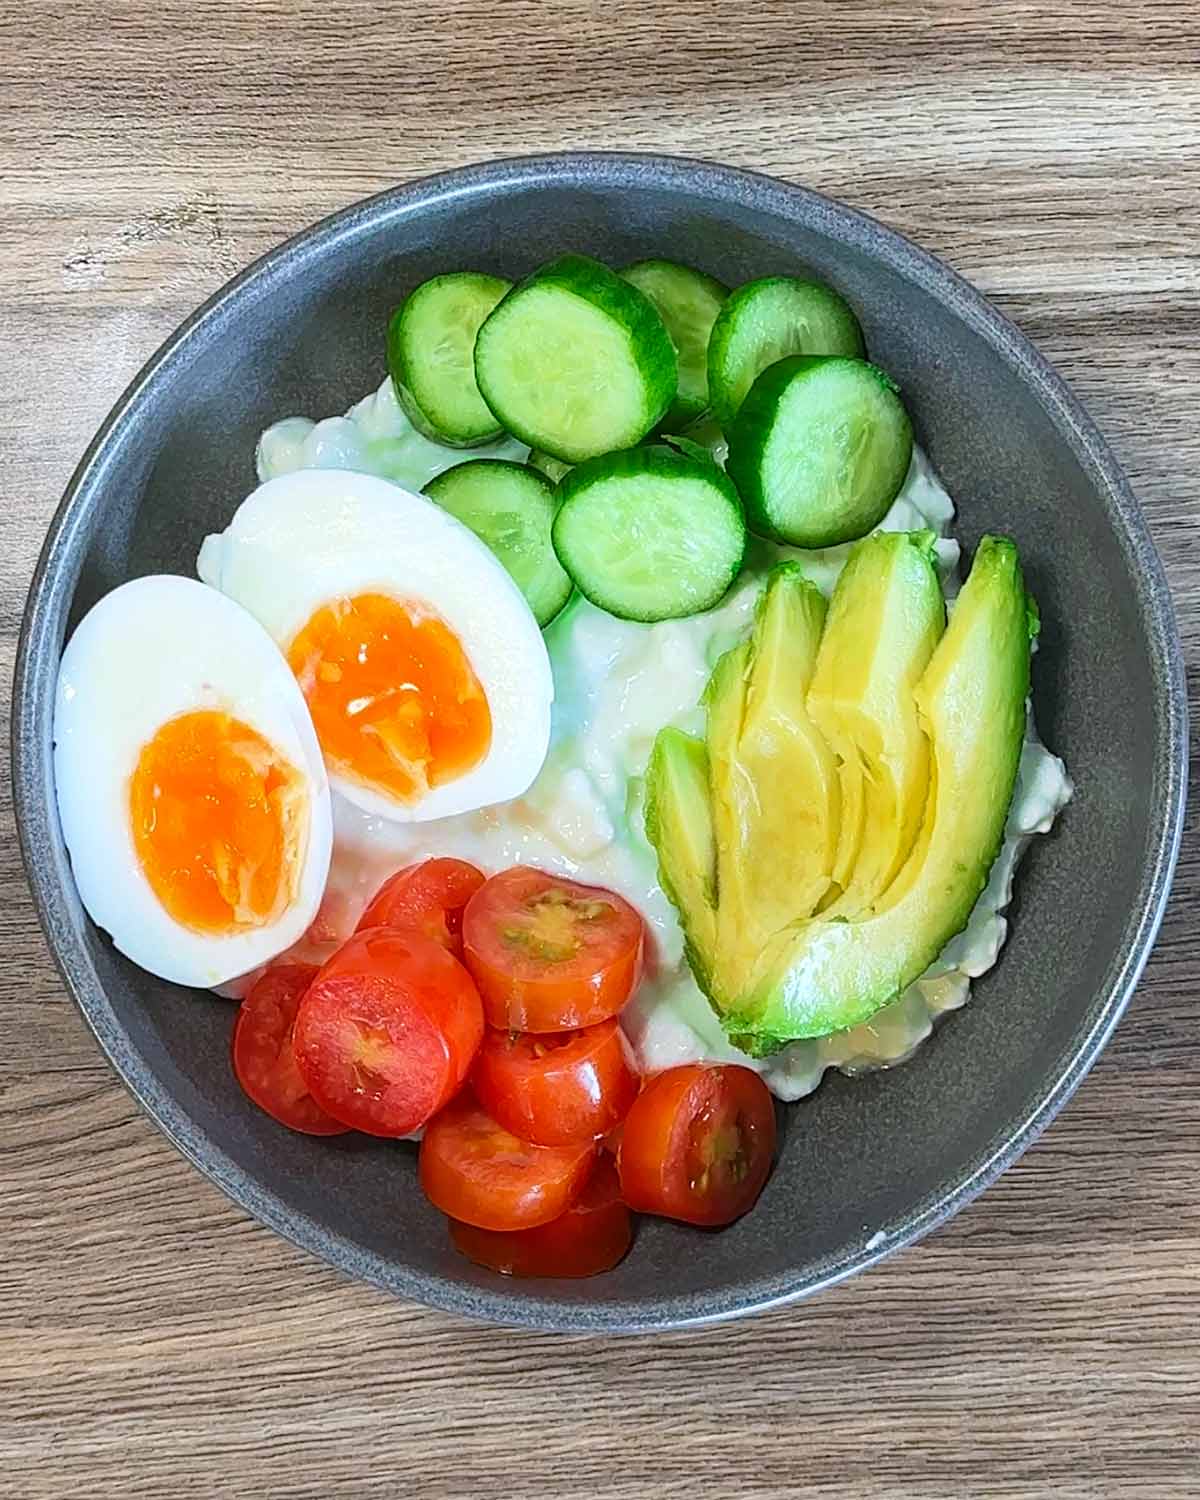 Boiled egg, cucumber, tomato and avocado added to the bowl.